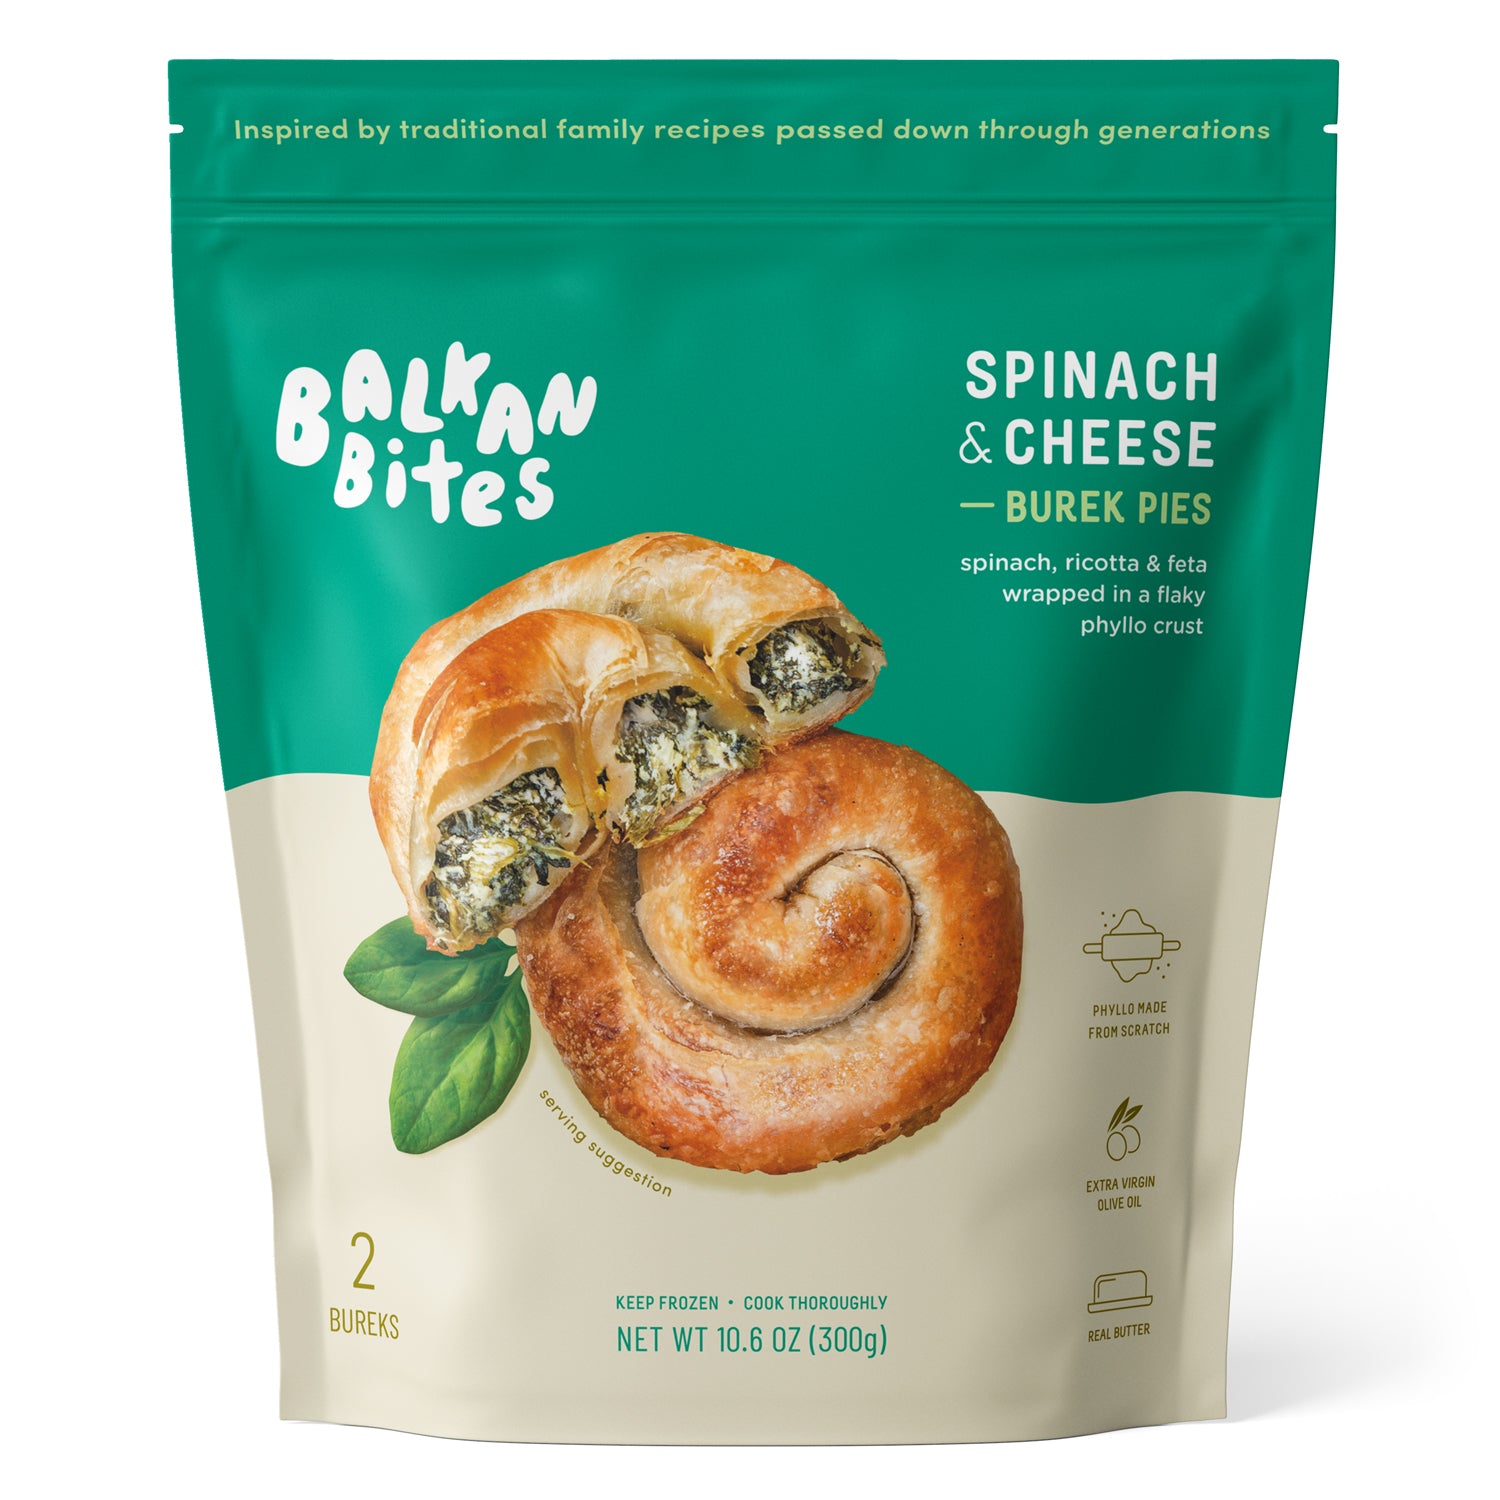 Frozen Spinach and Cheese Burek - 2 pieces